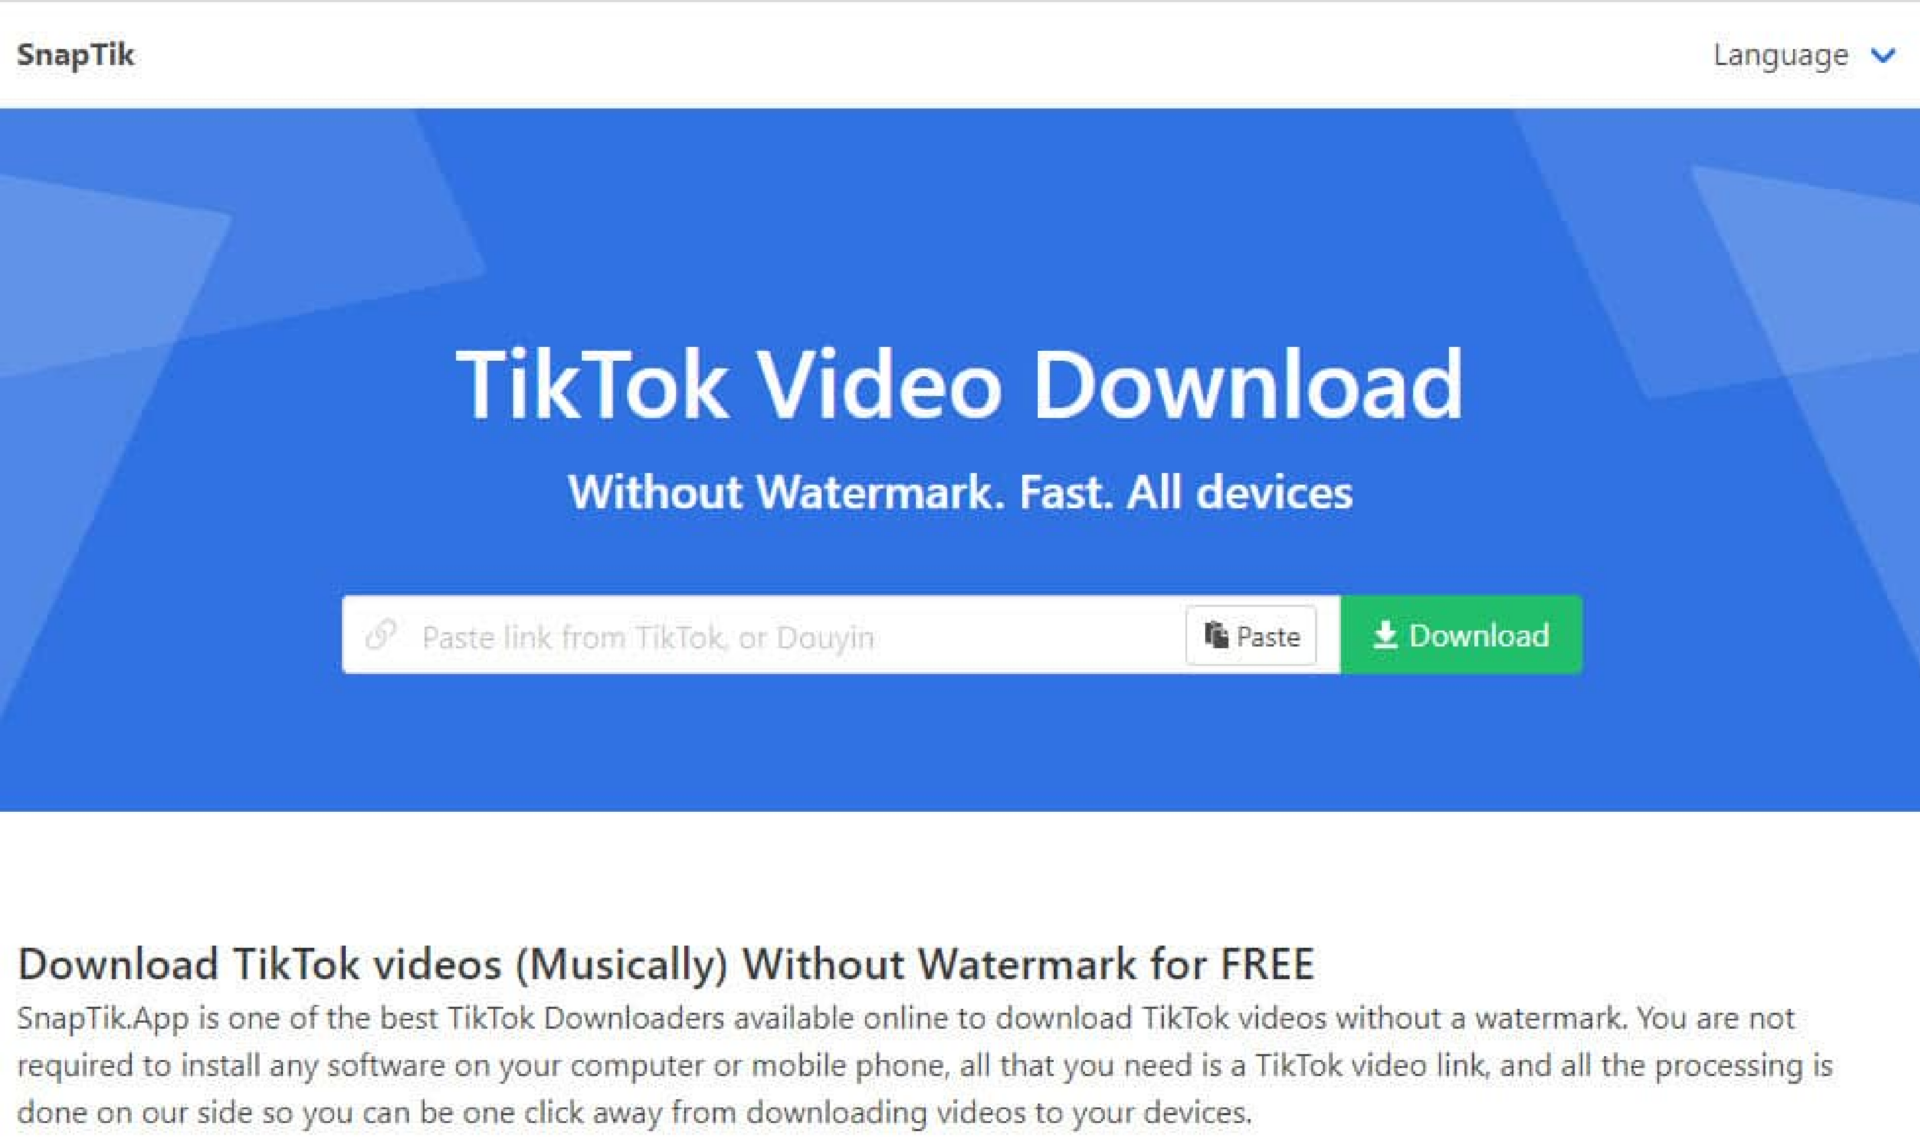 Download TikTok Videos Without Watermark for Free